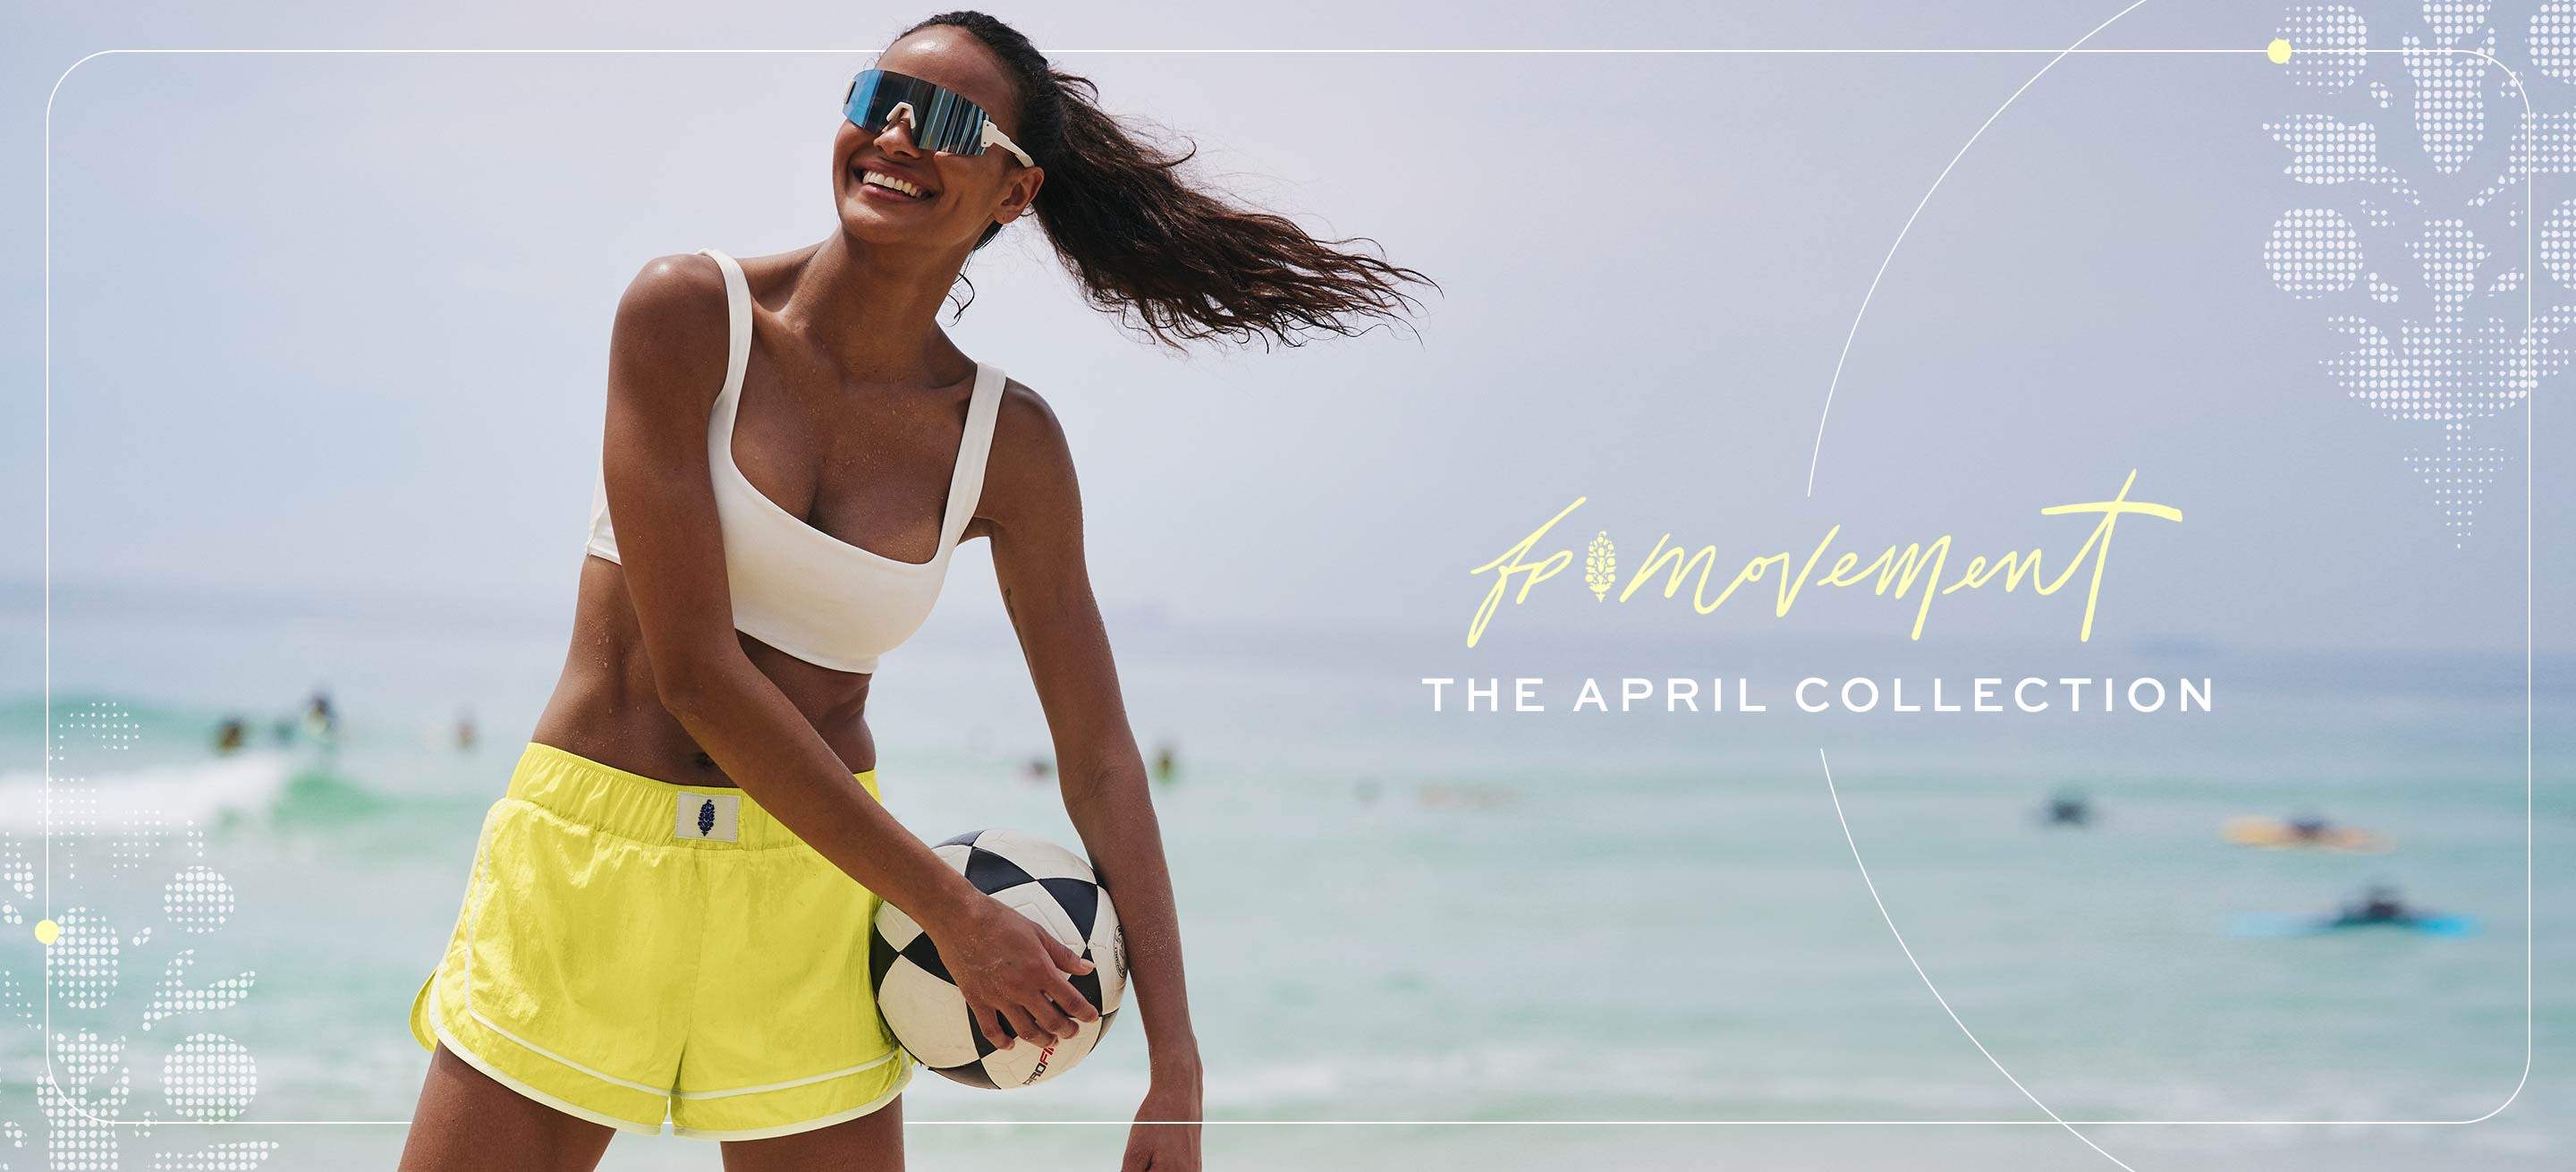 FP Movement: The April Collection